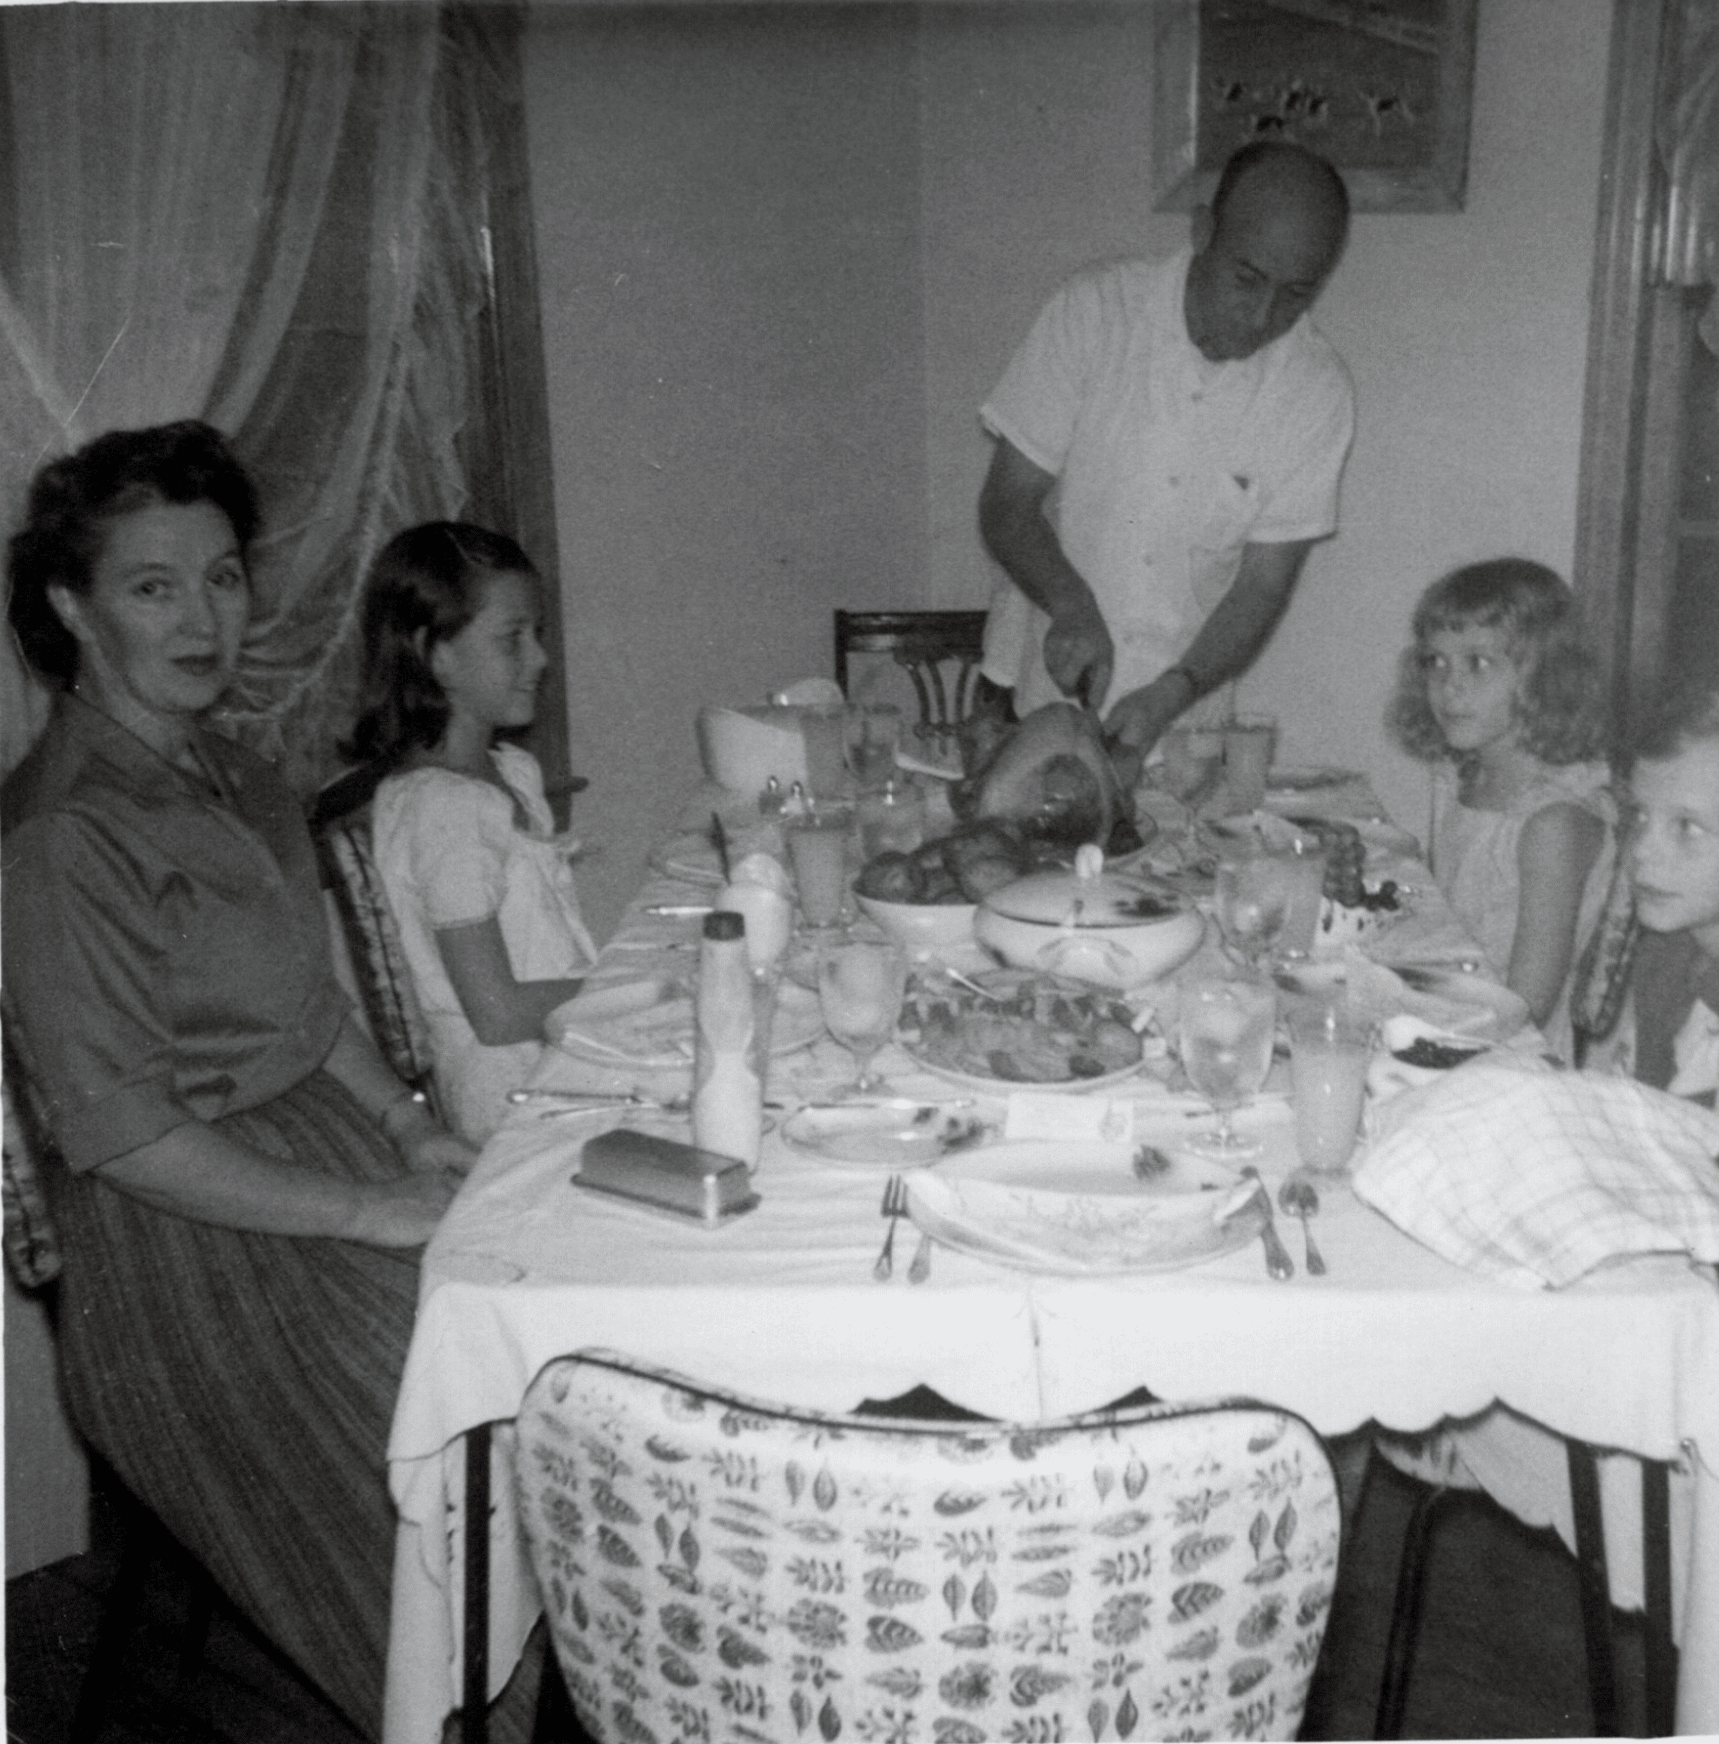 Pella Leitner as a child with her family (second from the left)